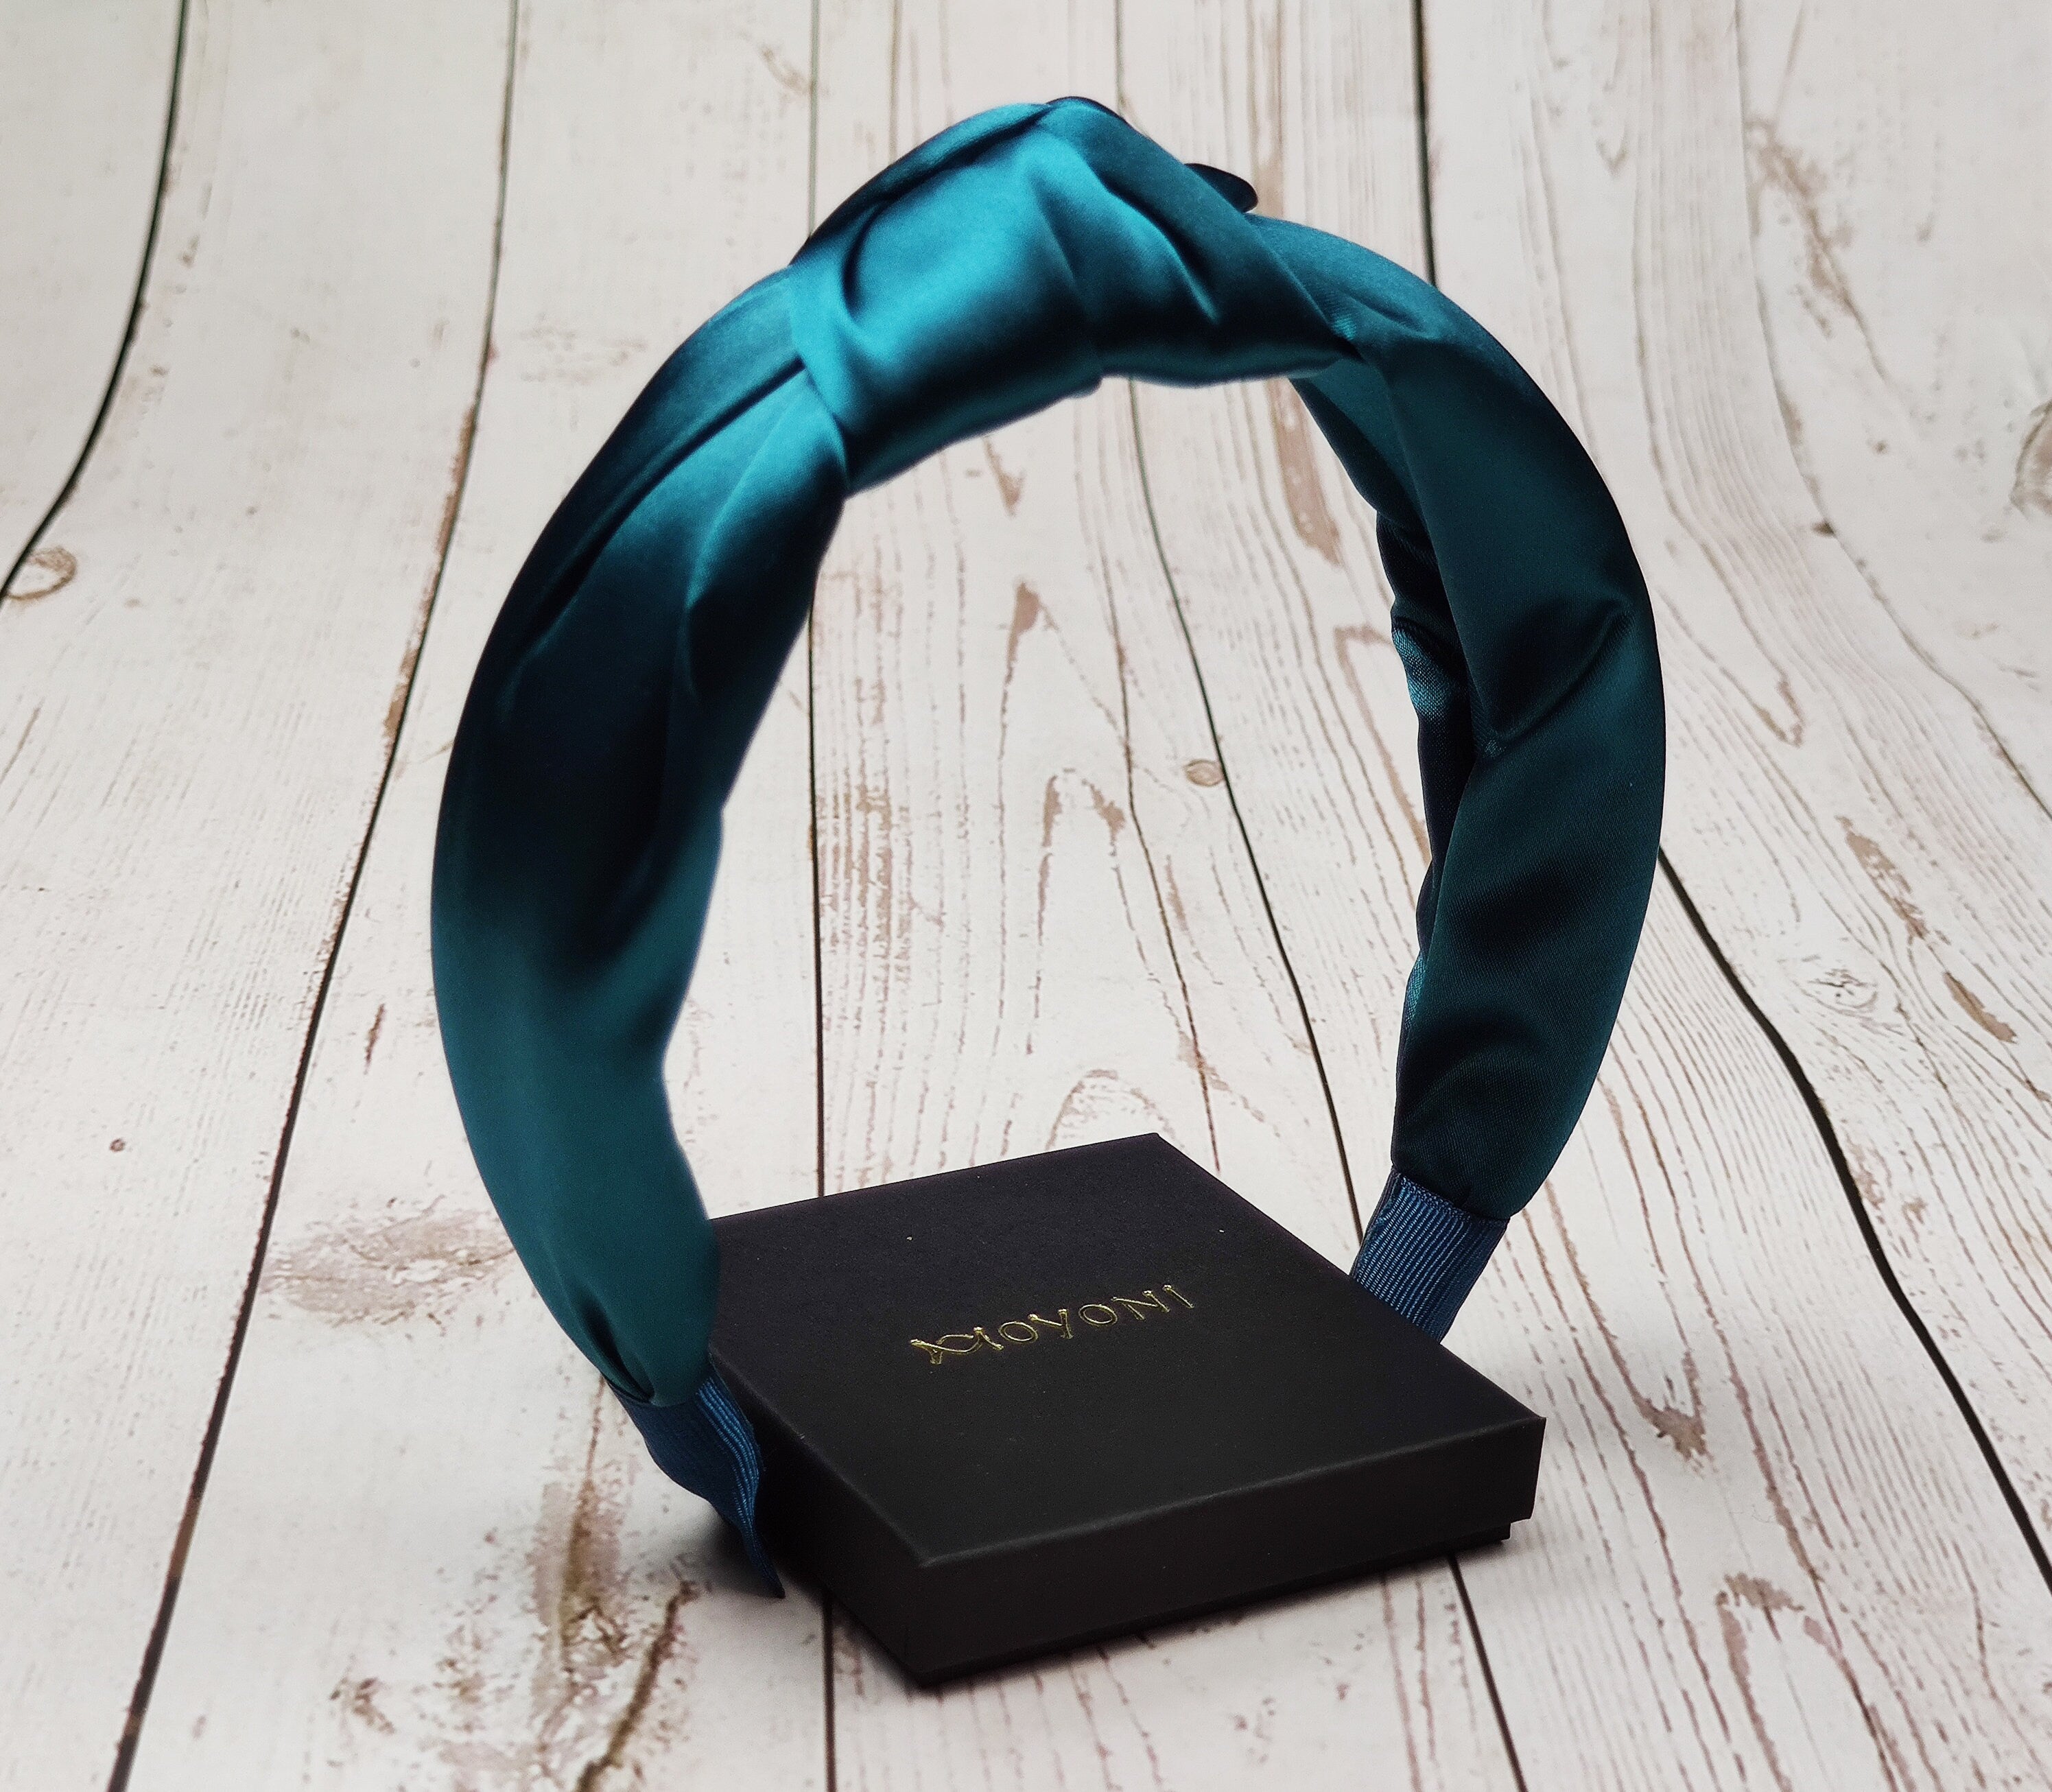 Stay stylish and comfortable with this bright blue-green Patrol Blue Padded Satin Headband. The perfect accessory for women who love to accessorize and add a pop of color to their everyday look.